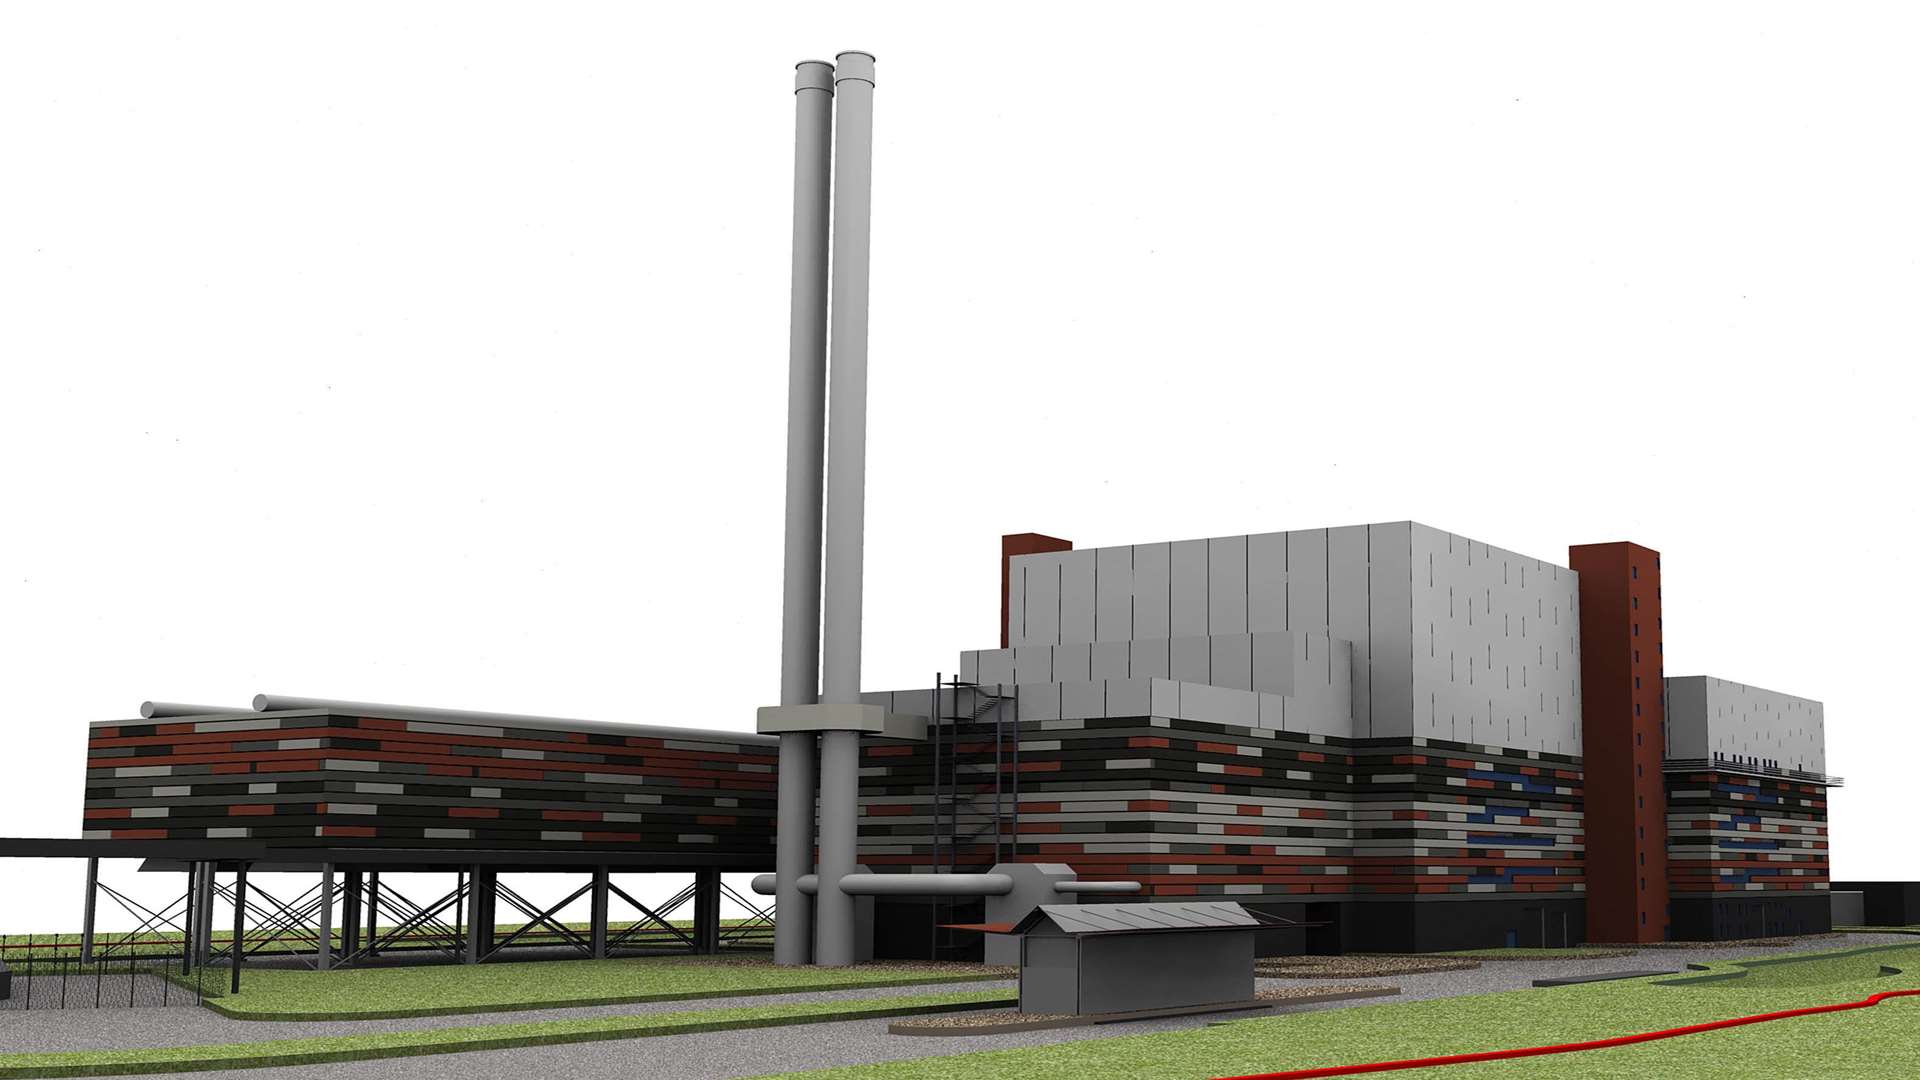 An artist's impression of the new plant